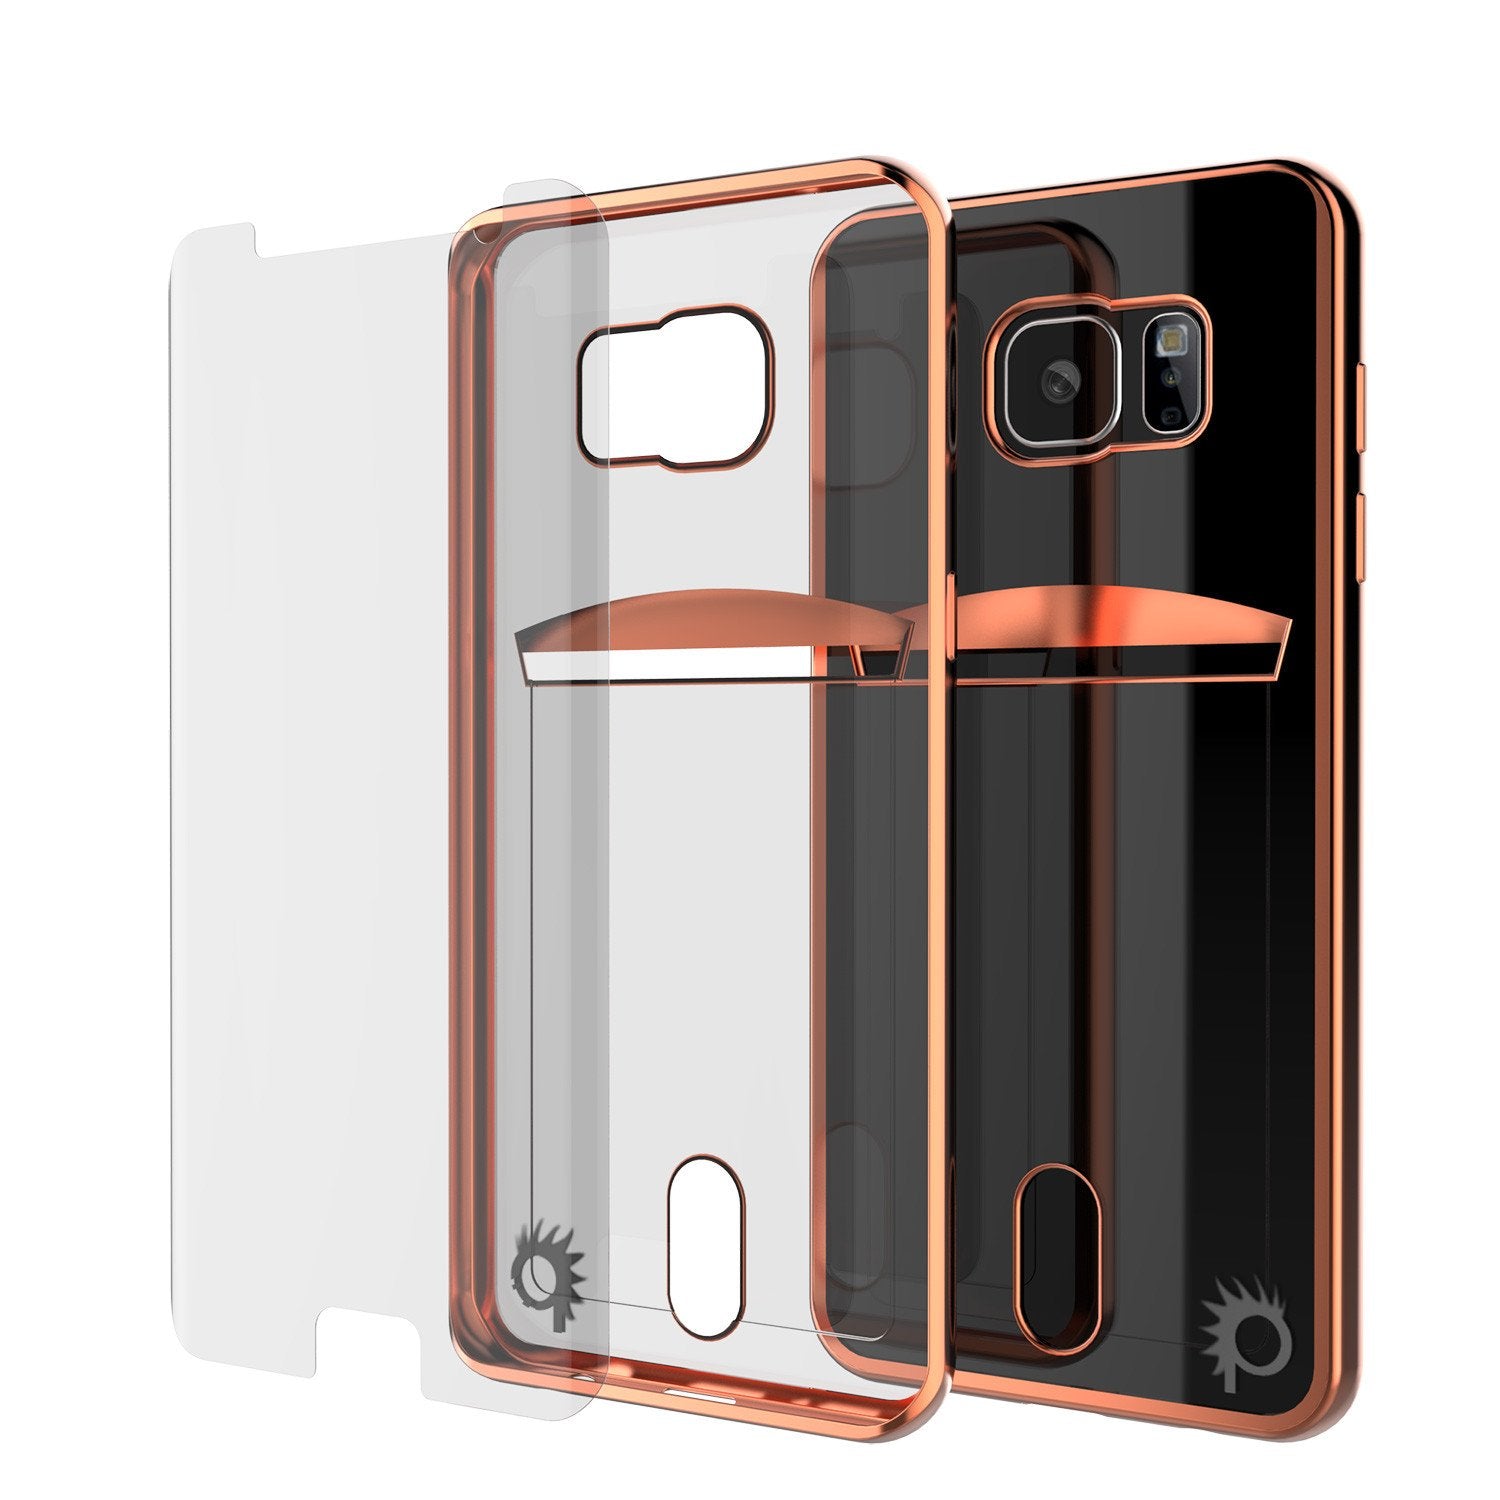 Galaxy S6 EDGE Case, PUNKCASE® LUCID Rose Gold Series | Card Slot | SHIELD Screen Protector - PunkCase NZ